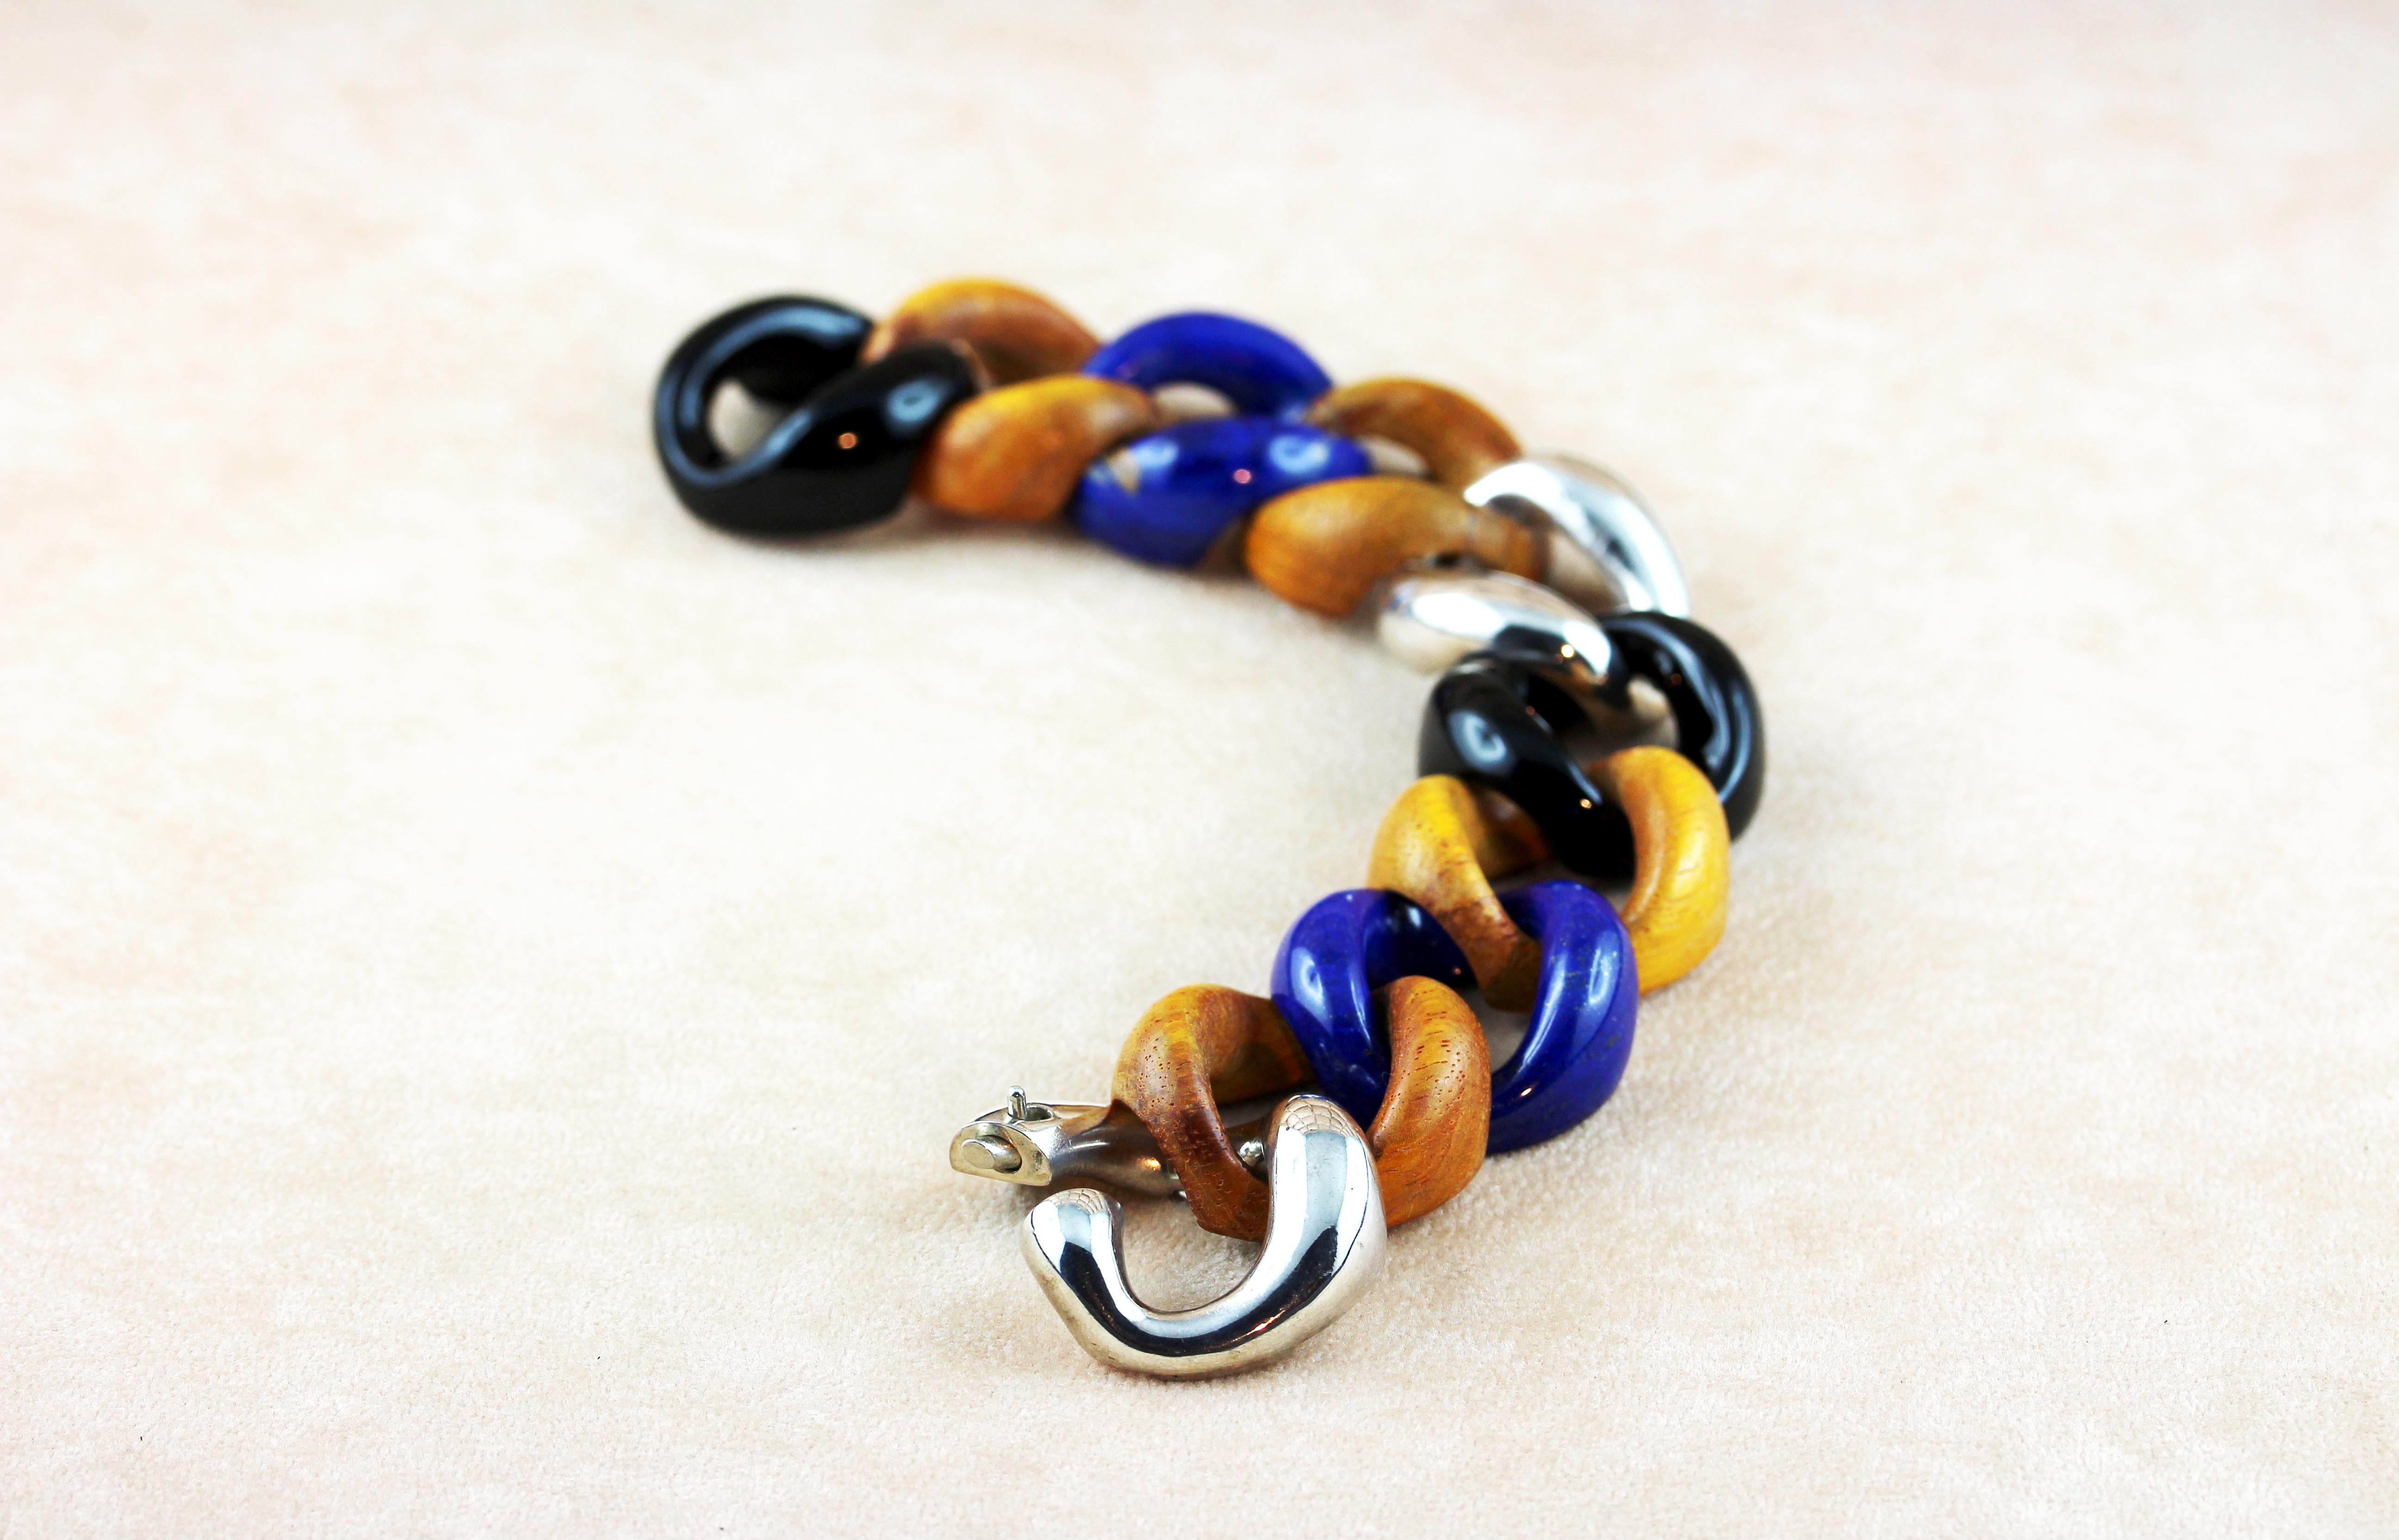 In this elegant groumette bracelet orange wooden rings are alternate with onyx rings and lapis lazuli rings, creating a striking combinations of textures, finishes, and colors, mixing sophistication and a contemporary allure.
The clasp and a ring in